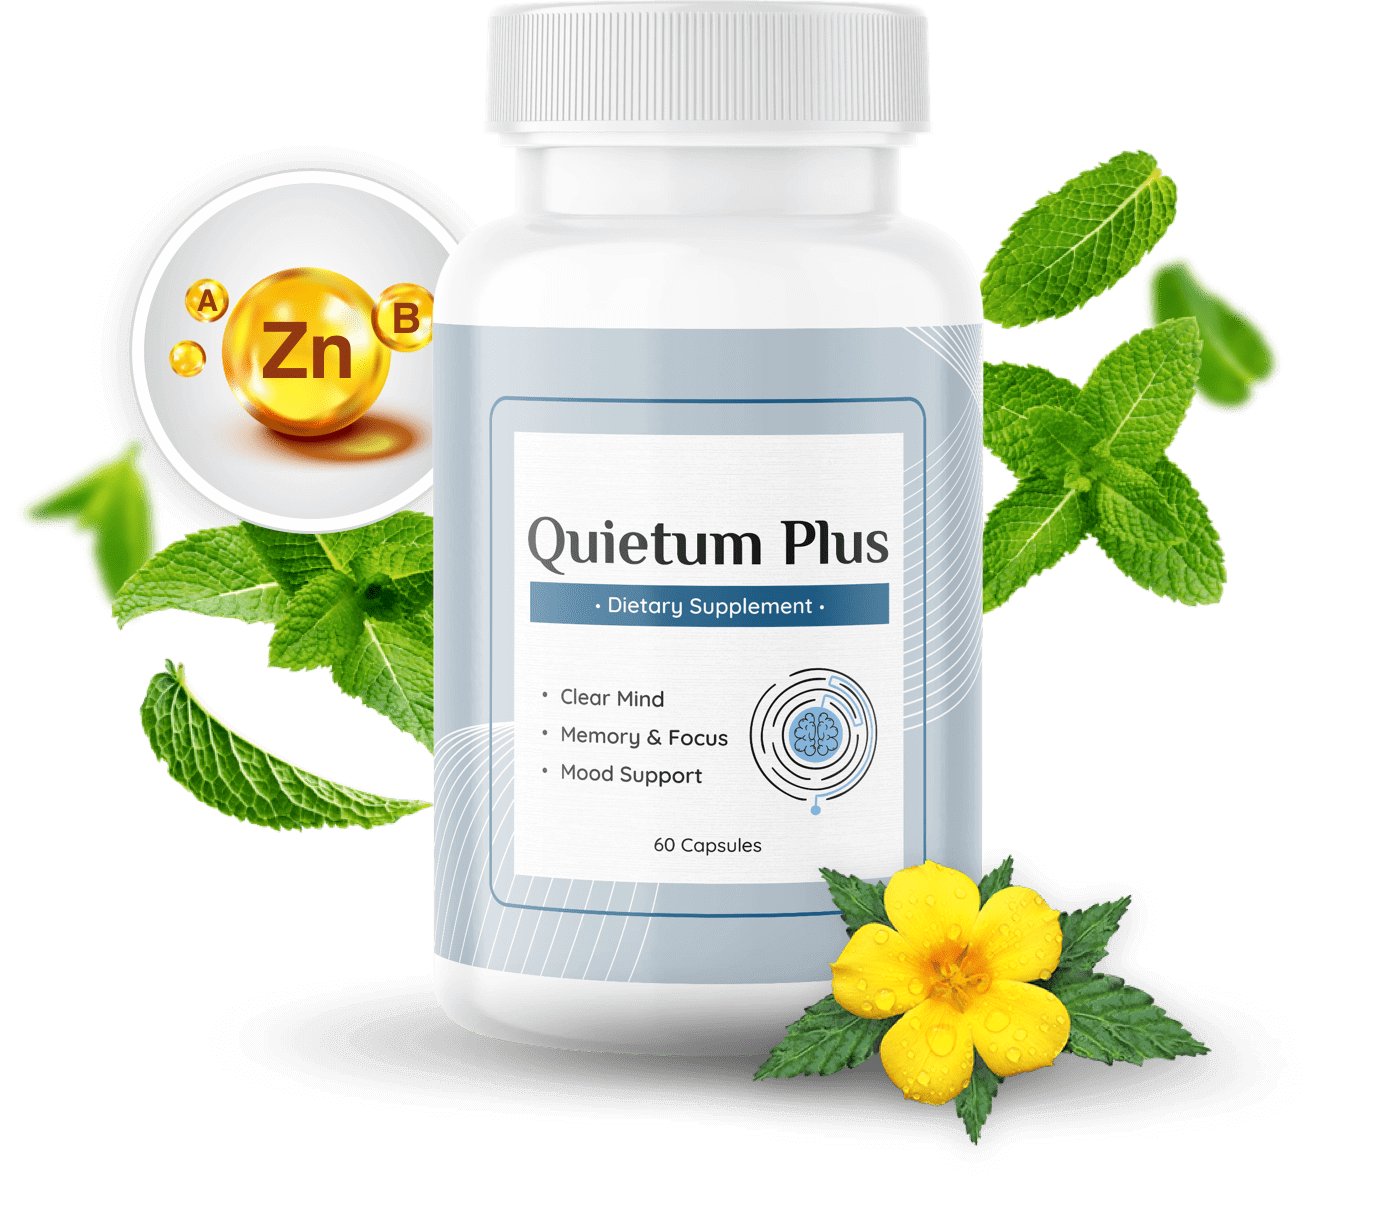 Enhance your hearing with Quietum Plus